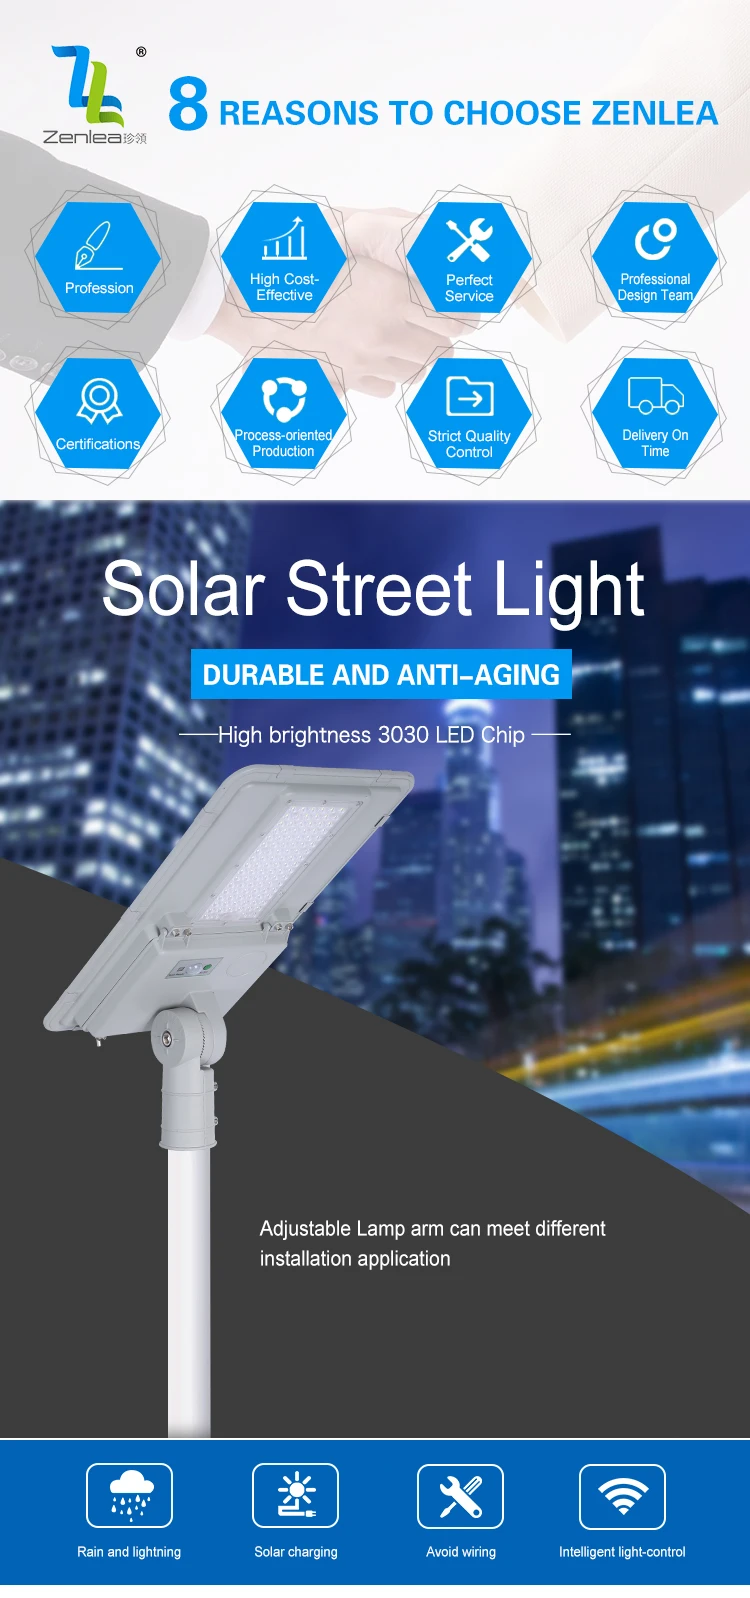 Die-Casting Aluminum Waterproof Ip65 60w 100w 180w Outdoor Integrated All In One Led Solar Road Light